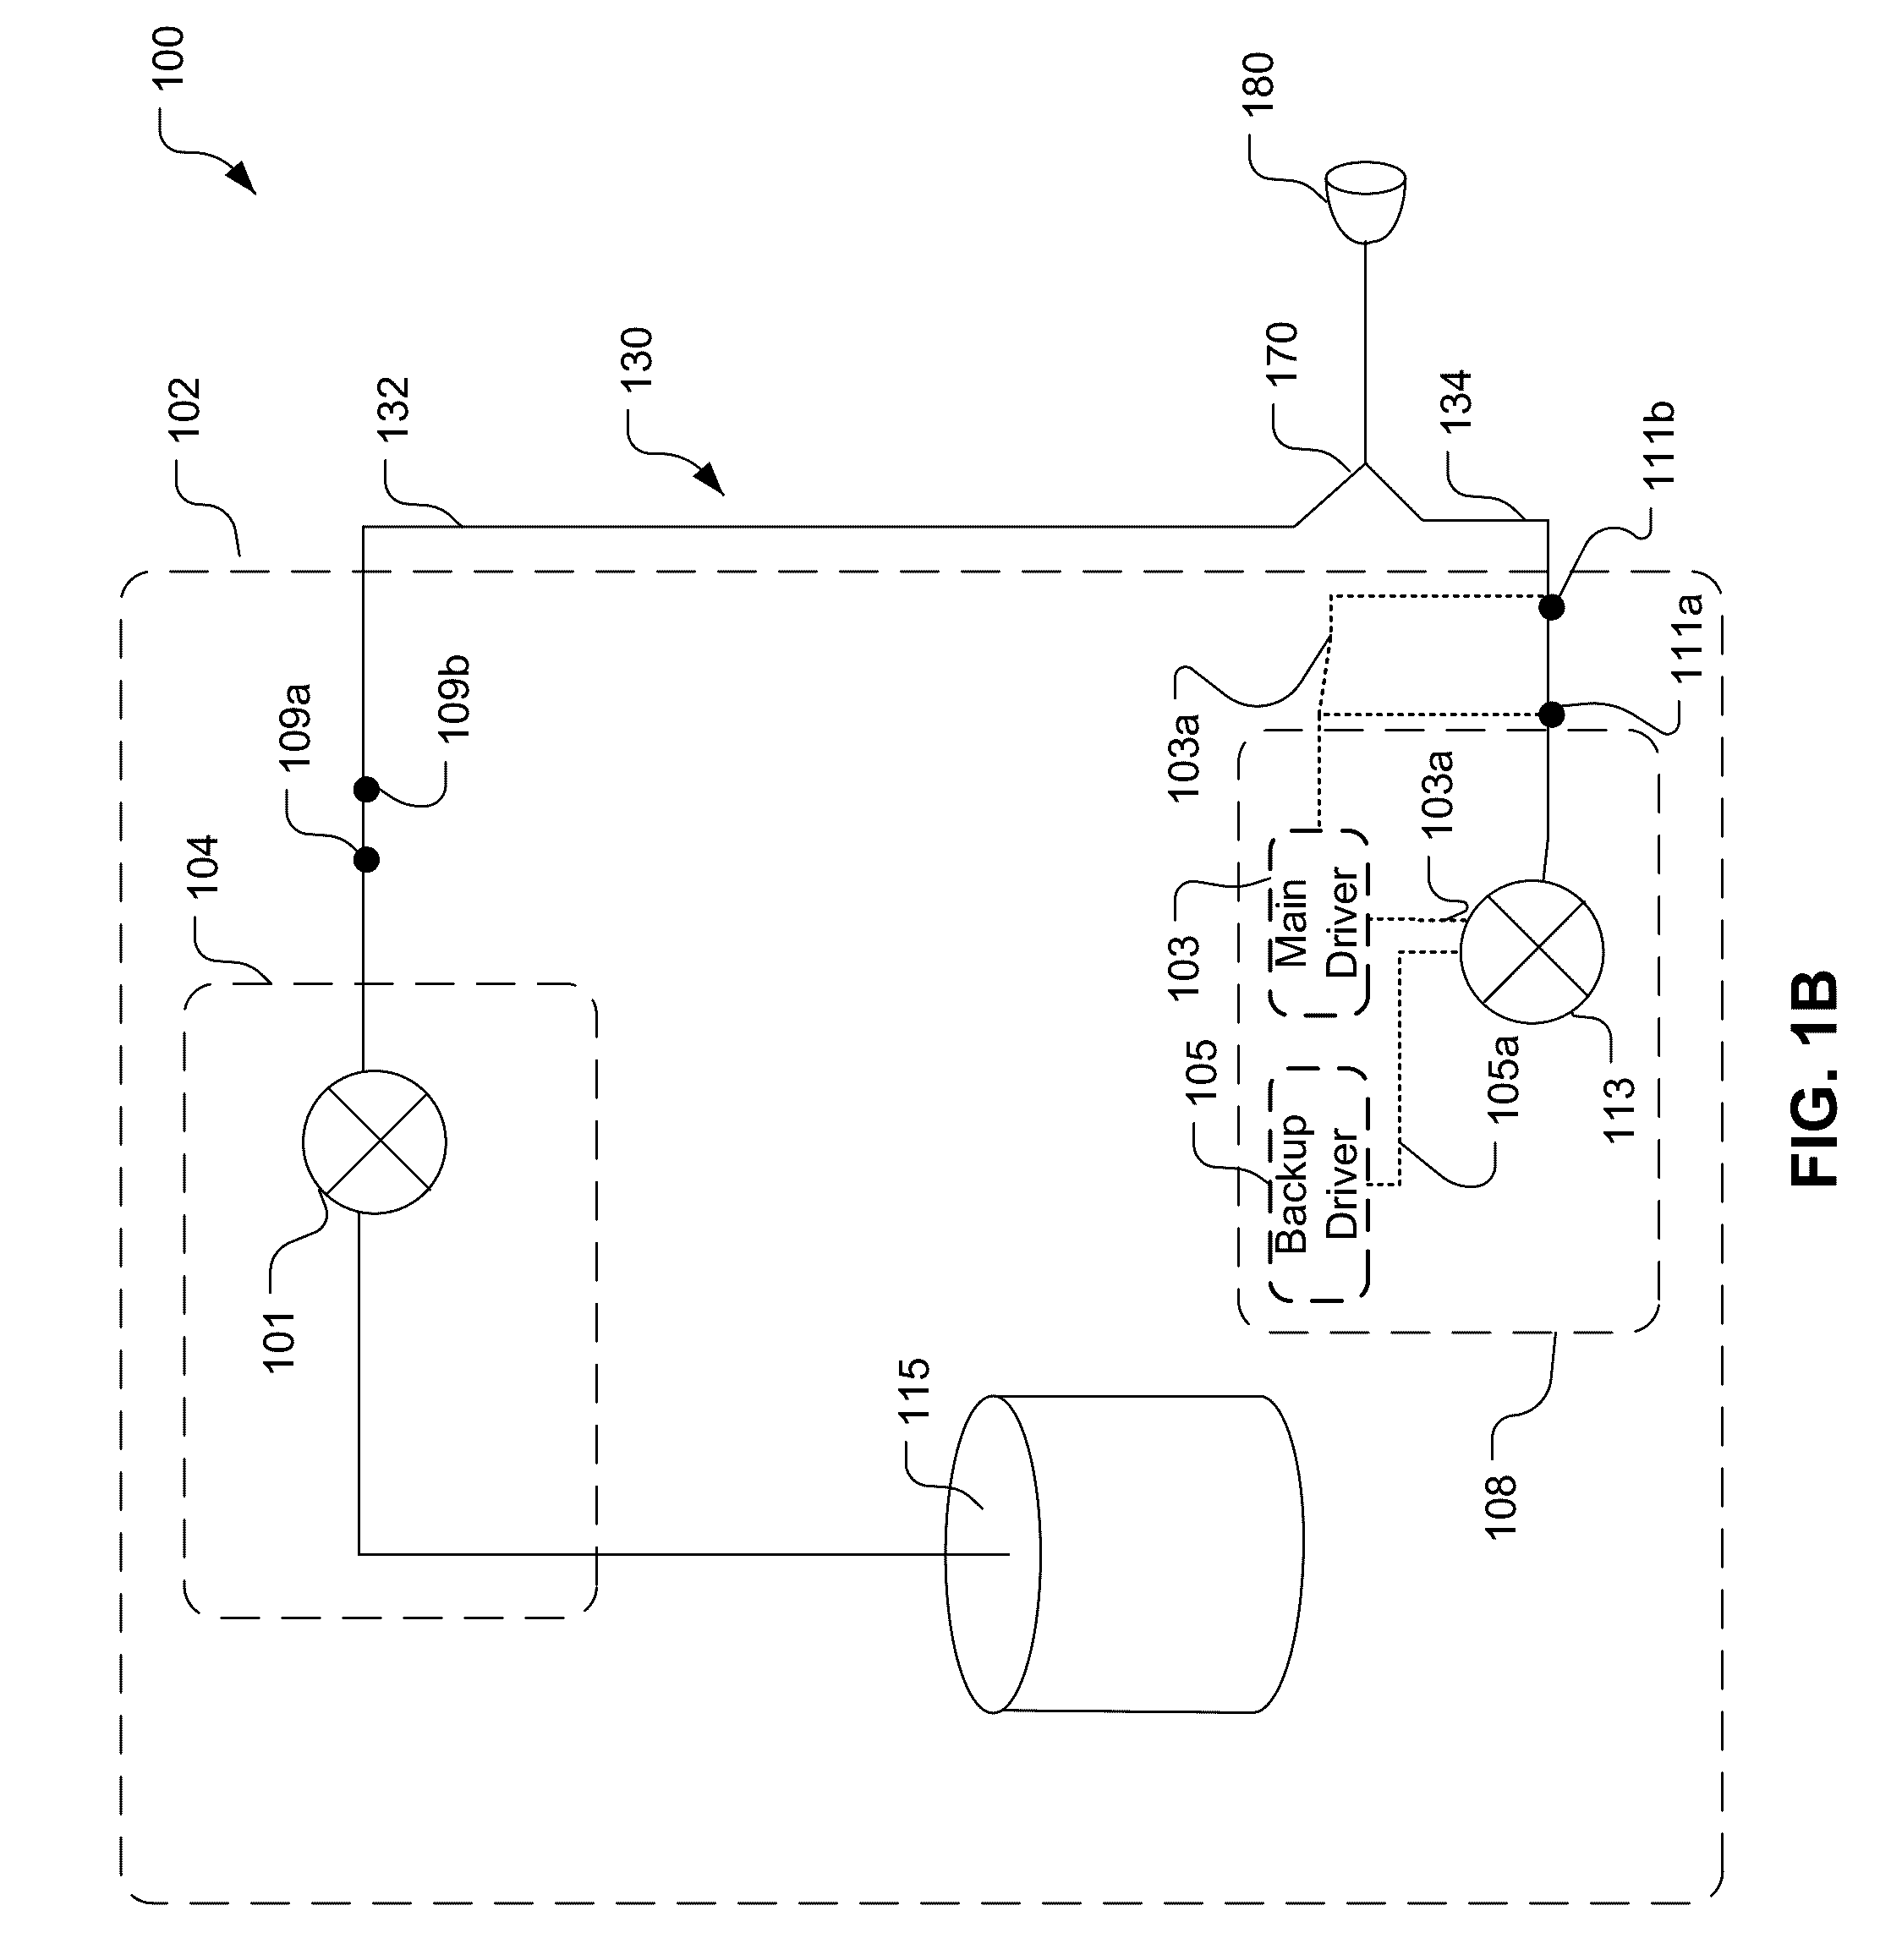 Methods and systems for ventilation with unknown exhalation flow and exhalation pressure